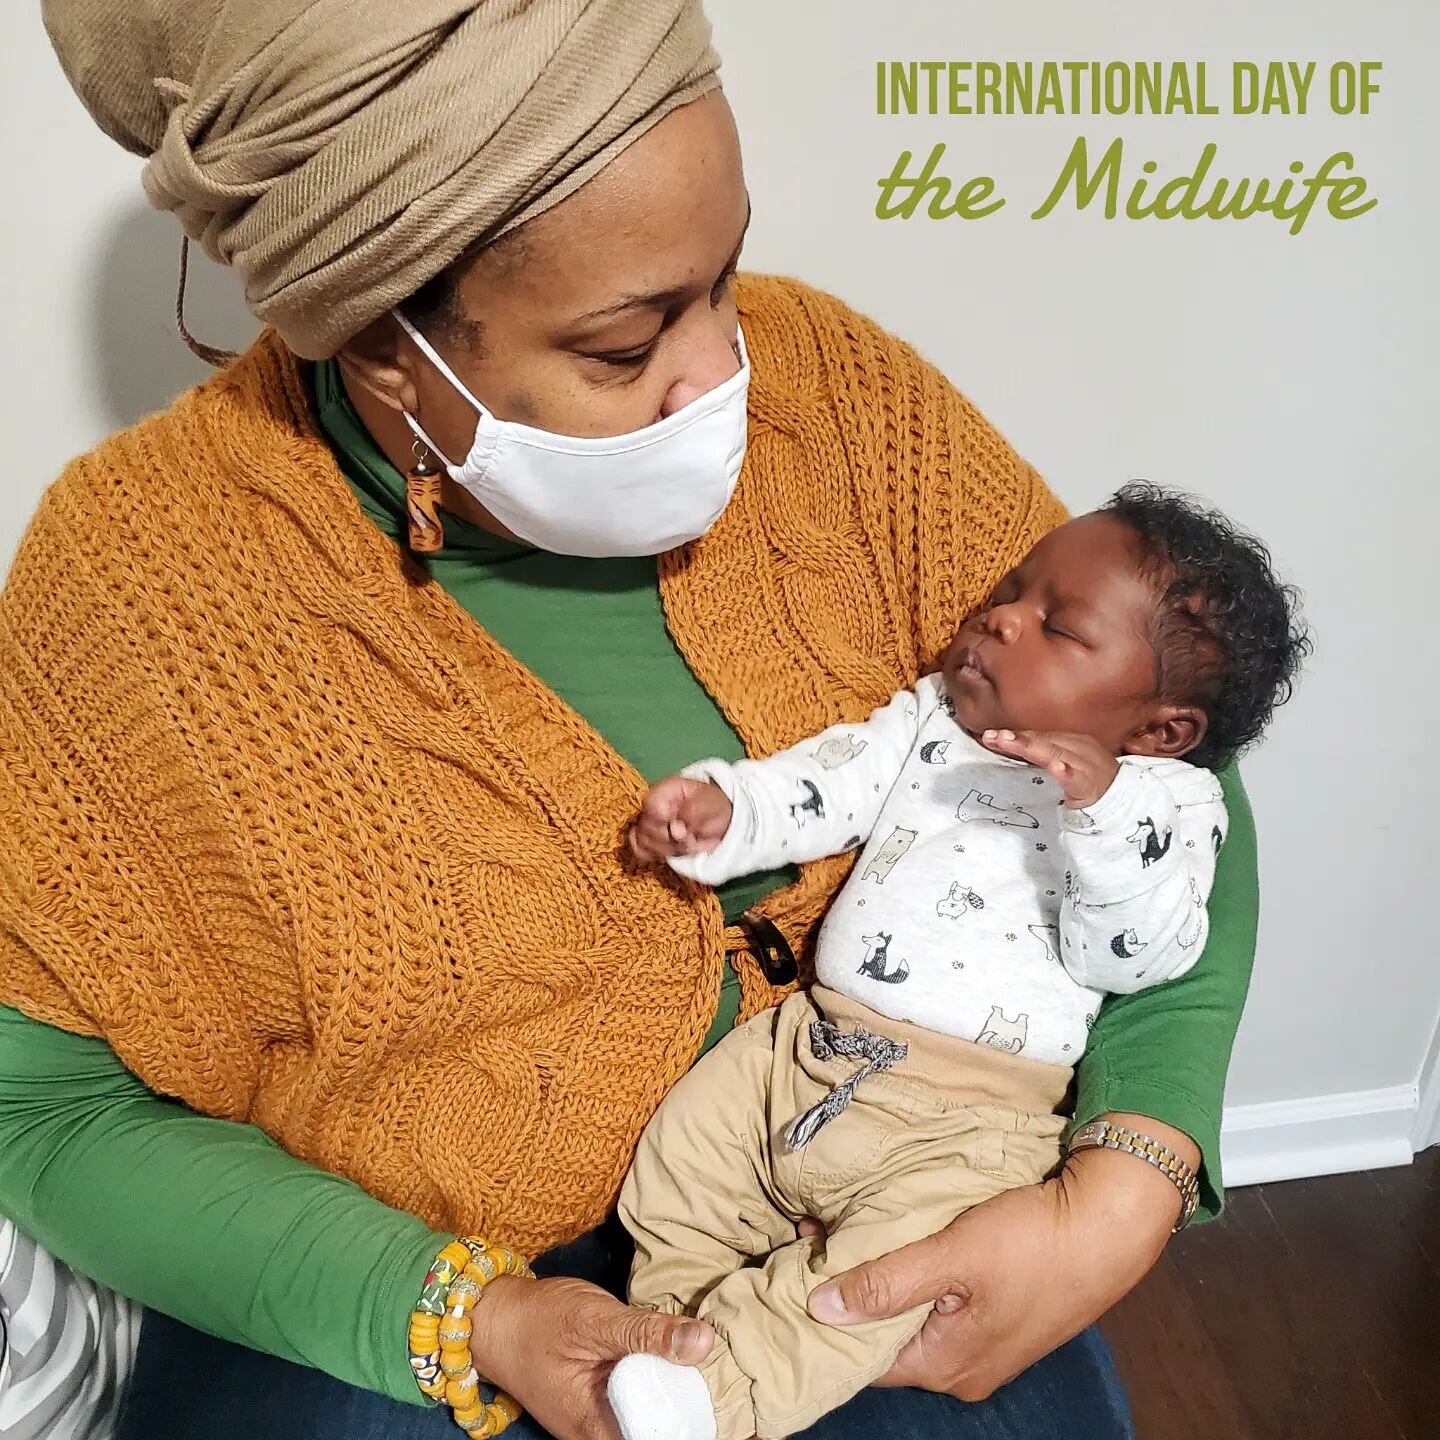 #sankofabirthsquad 
#internationaldayofthemidwife 

It's International Day of the Midwife! 🥳

Sending out big love to all the midwives and midwifery students today! We see you. We love you. We celebrate you. 

#homebirth #homebirthmidwife #midwife #